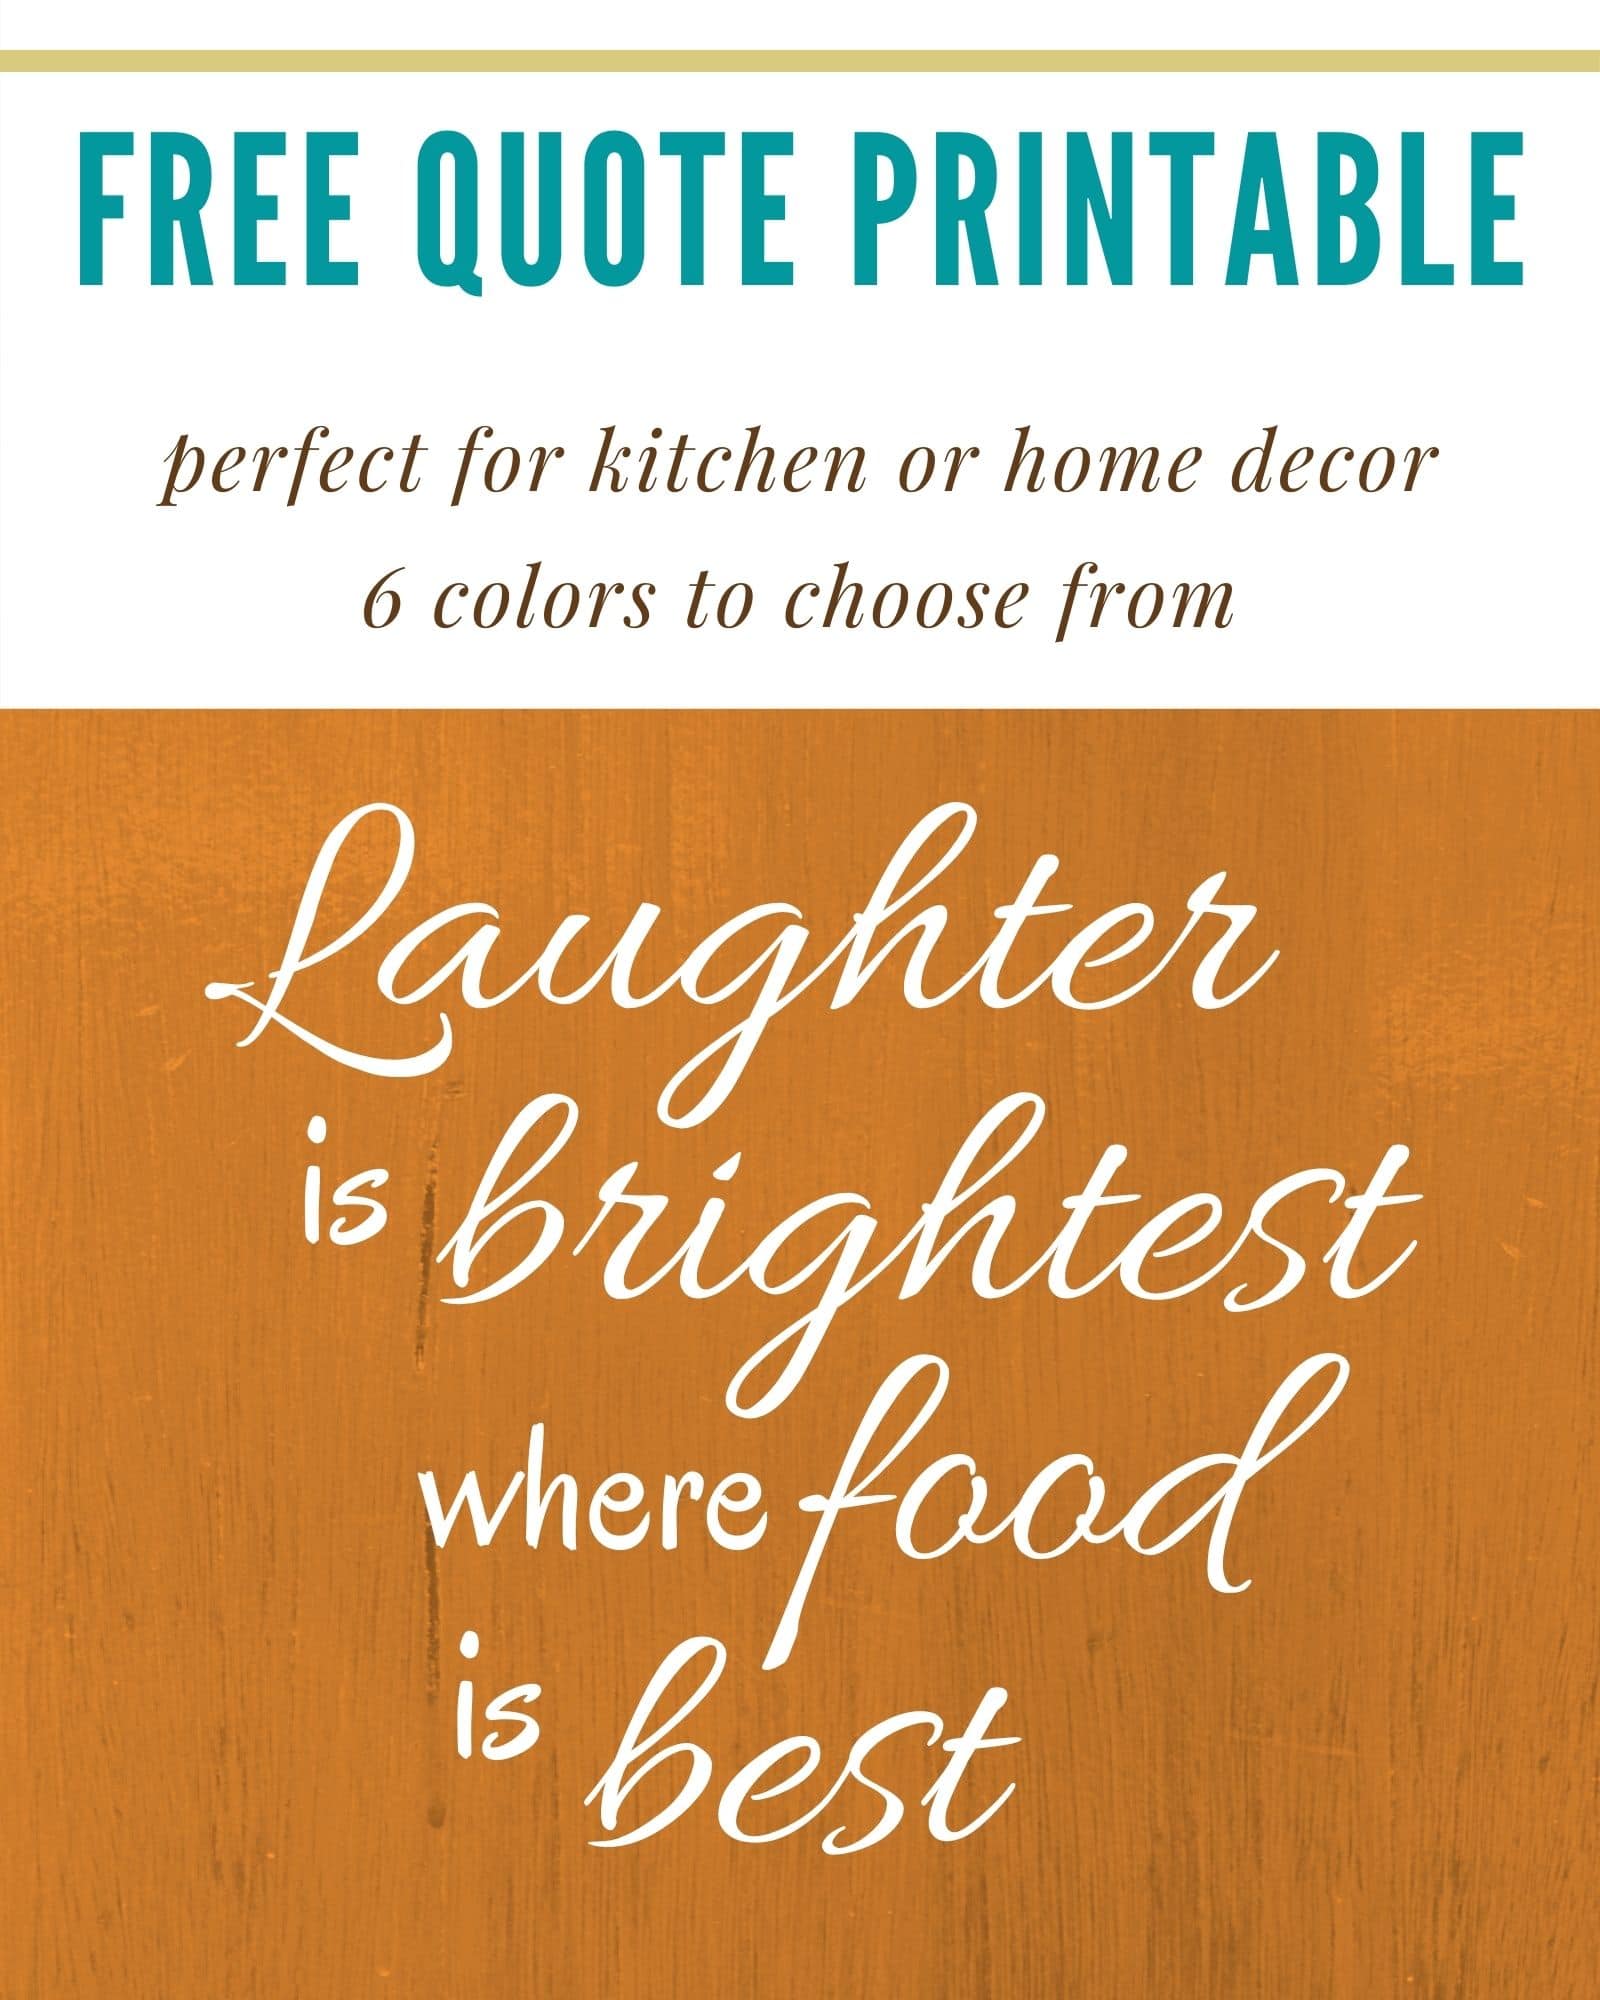 Free chalkboard printable: Laughter is brightest where food is best- Irish proverb |by Jonesin' For Taste